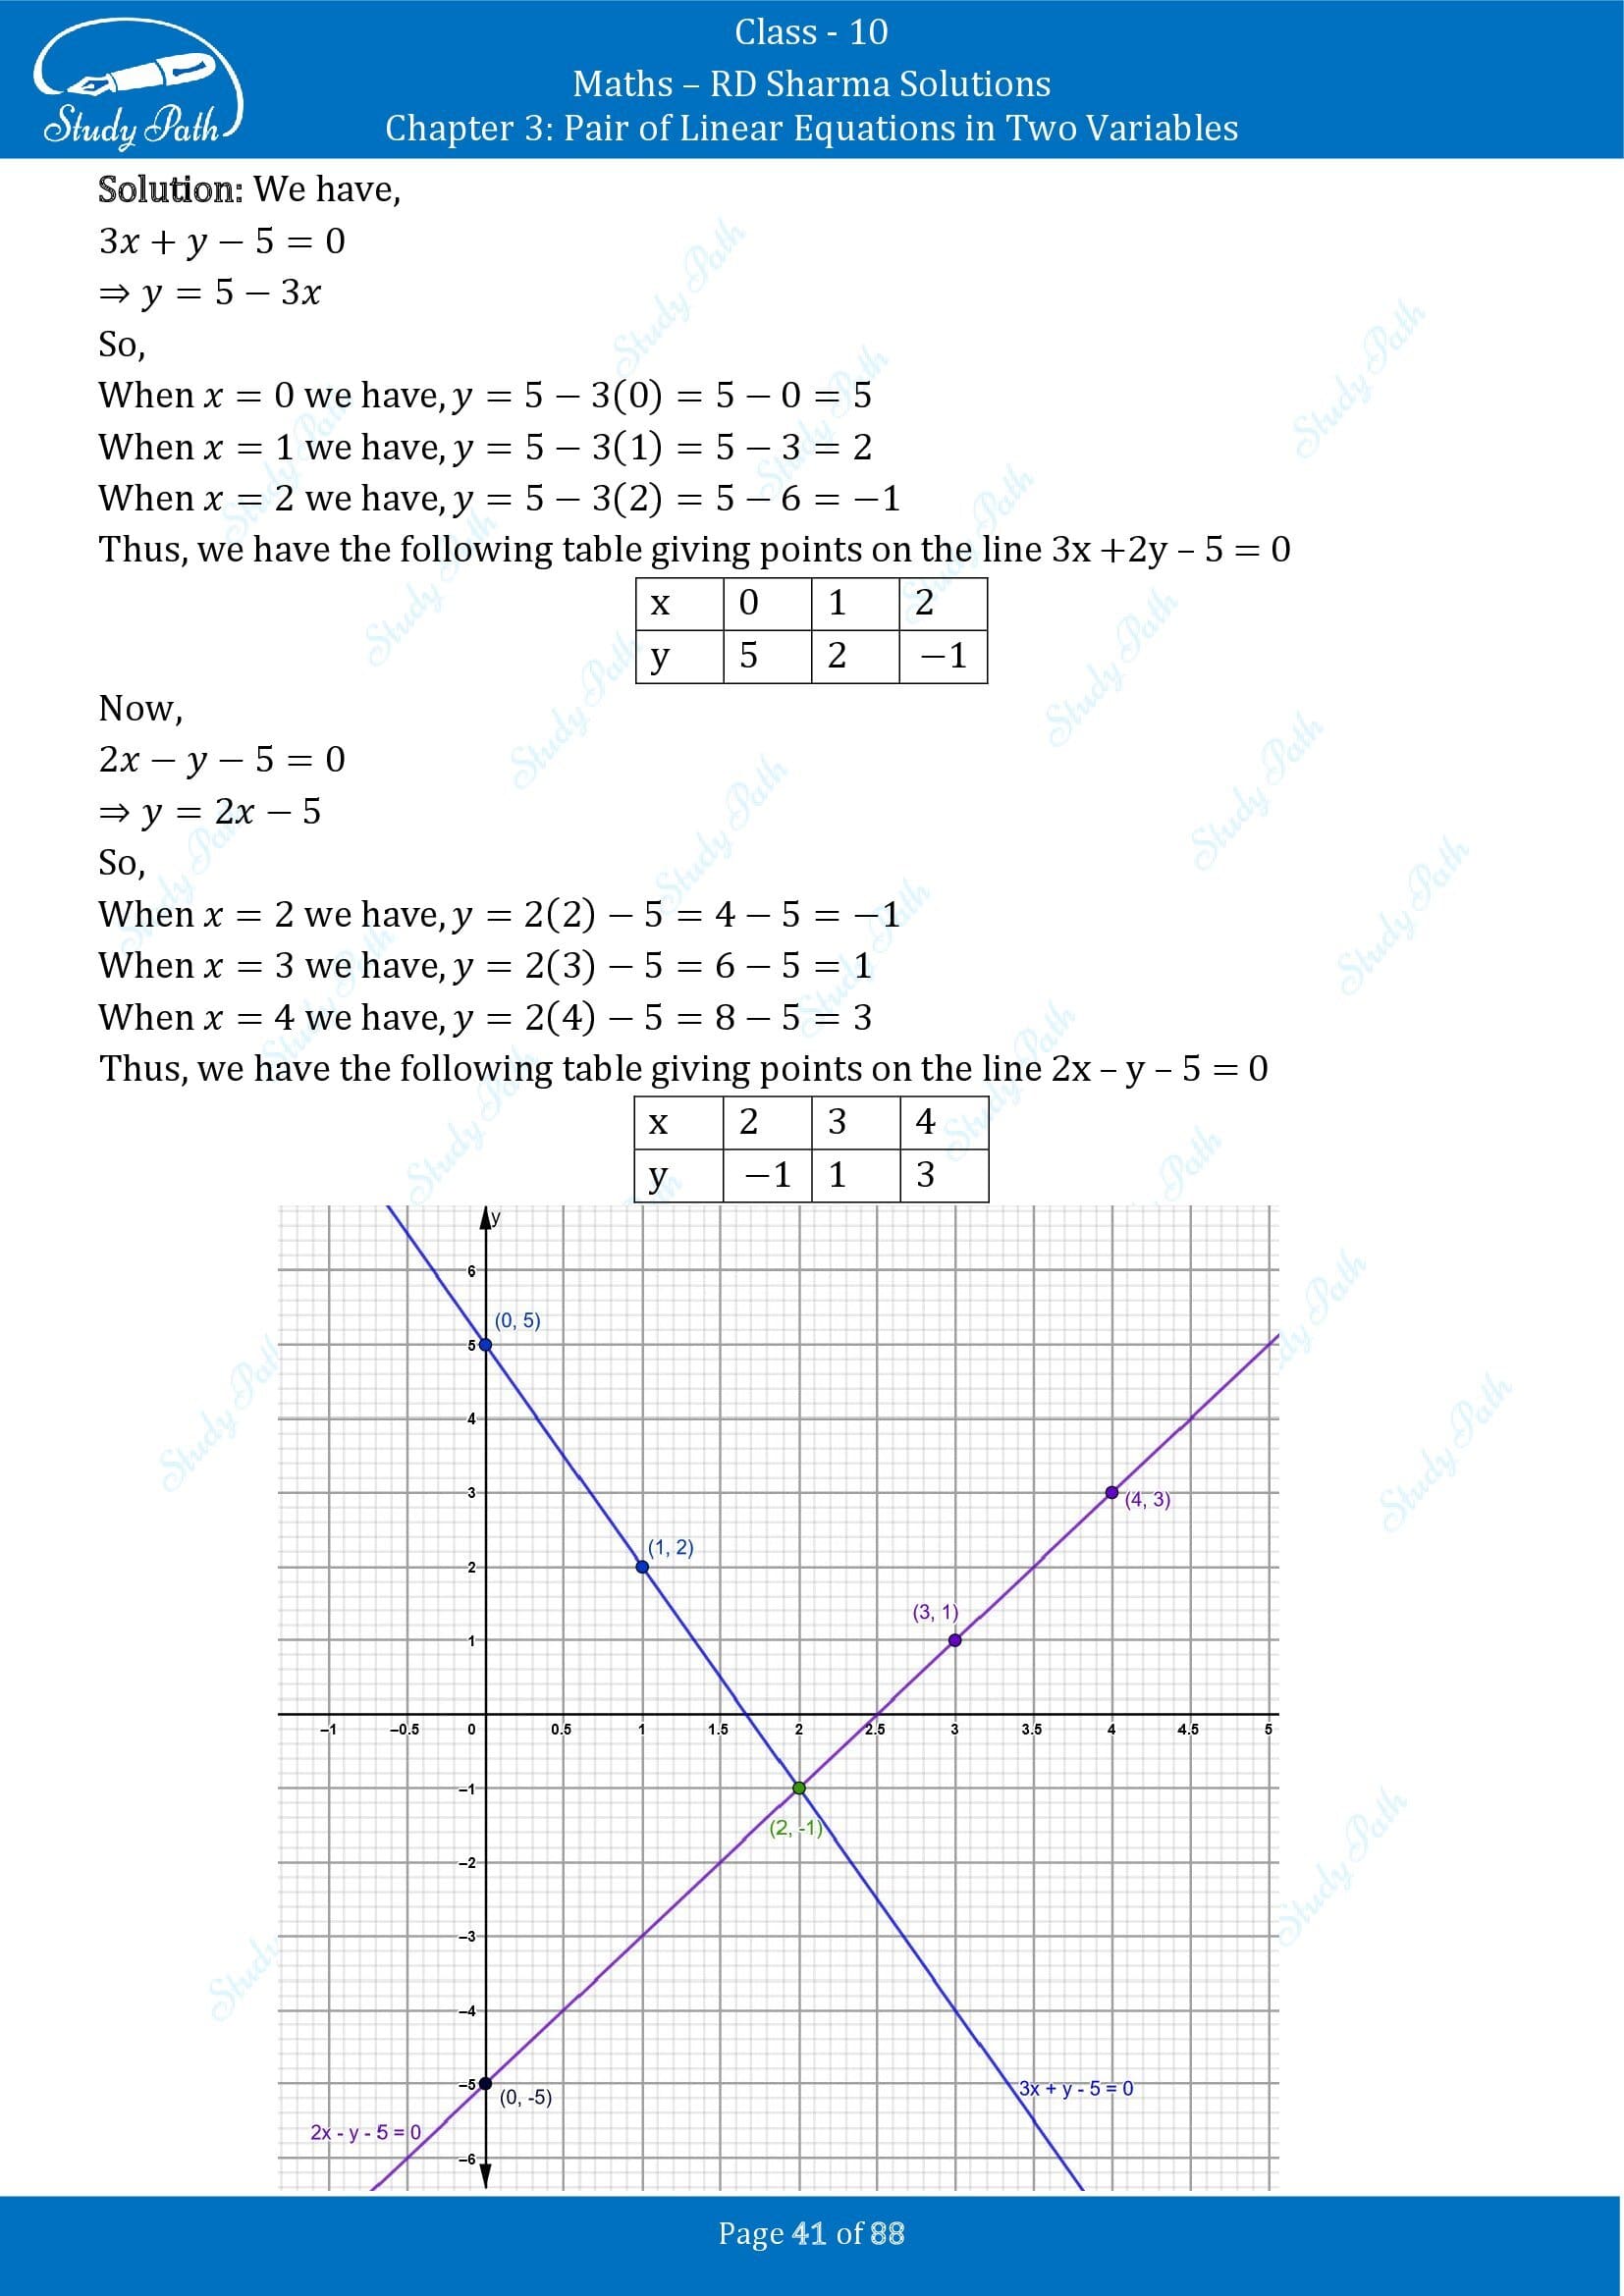 RD Sharma Solutions Class 10 Chapter 3 Pair of Linear Equations in Two Variables Exercise 3.2 00041